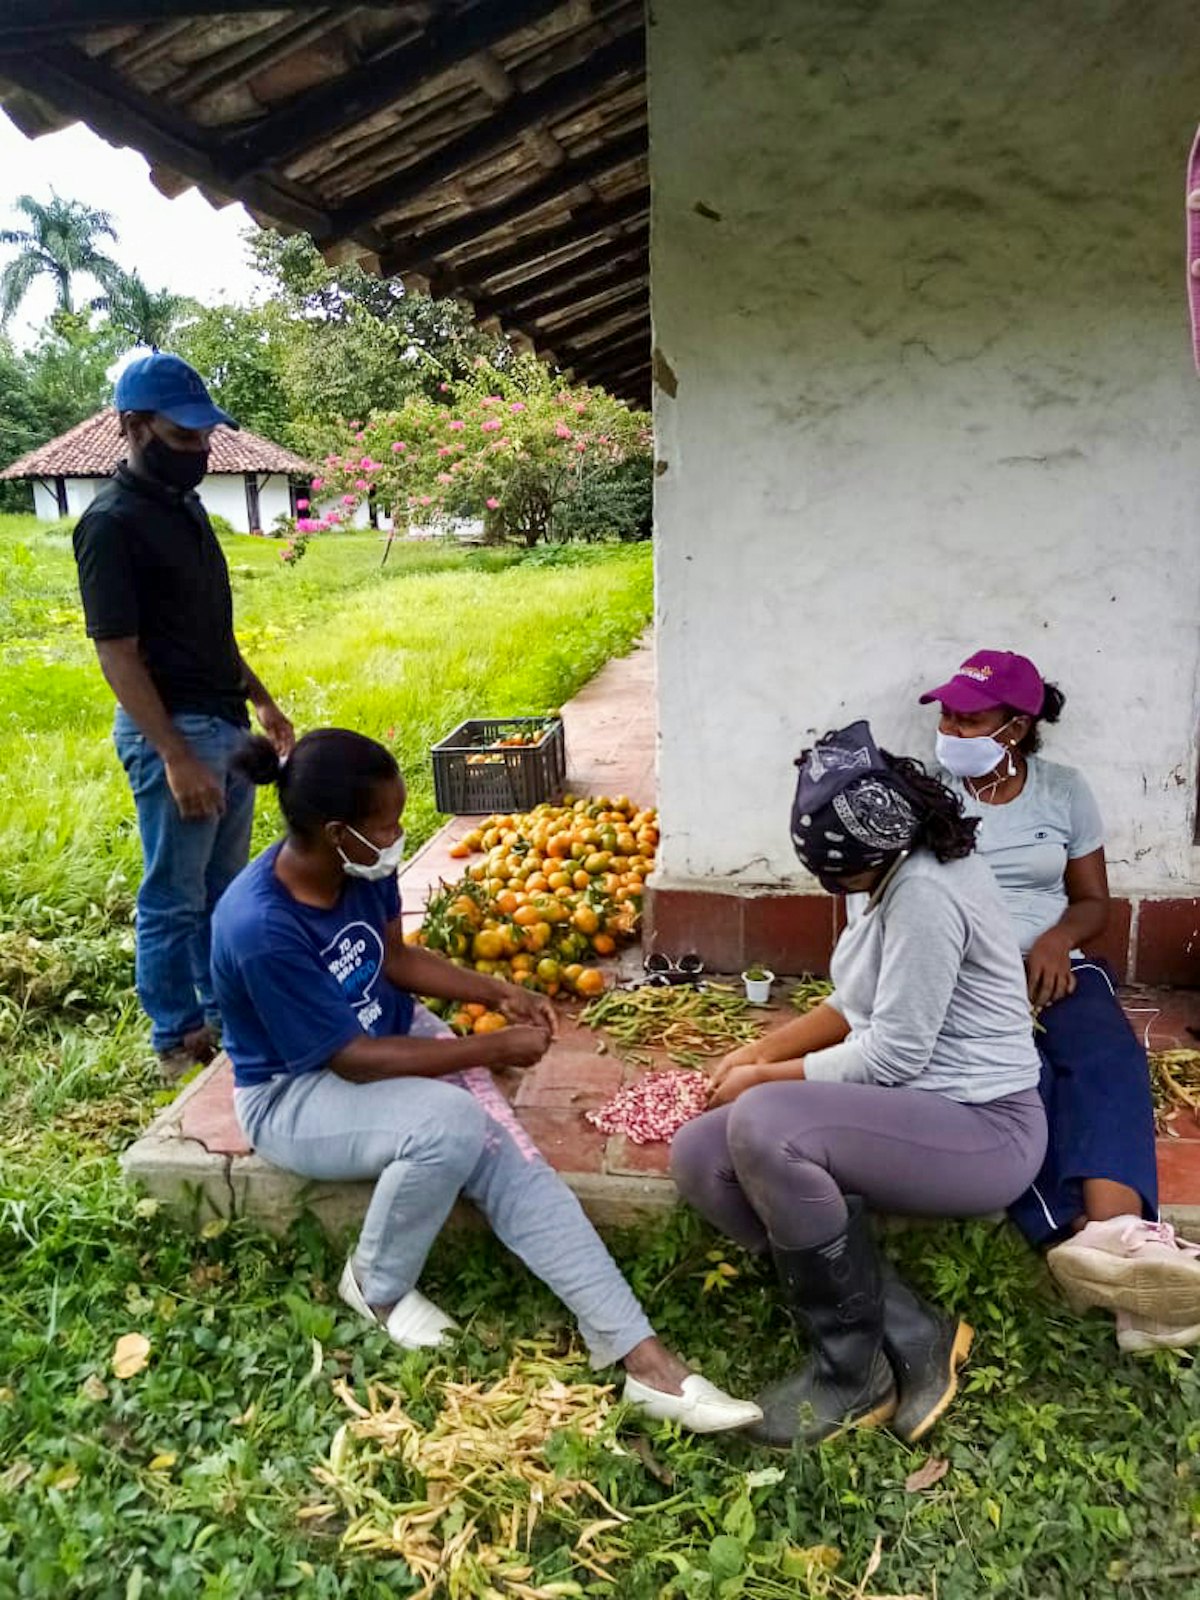 At a facility of the University Center for Rural Wellbeing in Perico Negro, Cauca, Colombia, a group of friends has been learning to cultivate various crops on a 2 hectare site, providing some 50 families with access to healthy food.